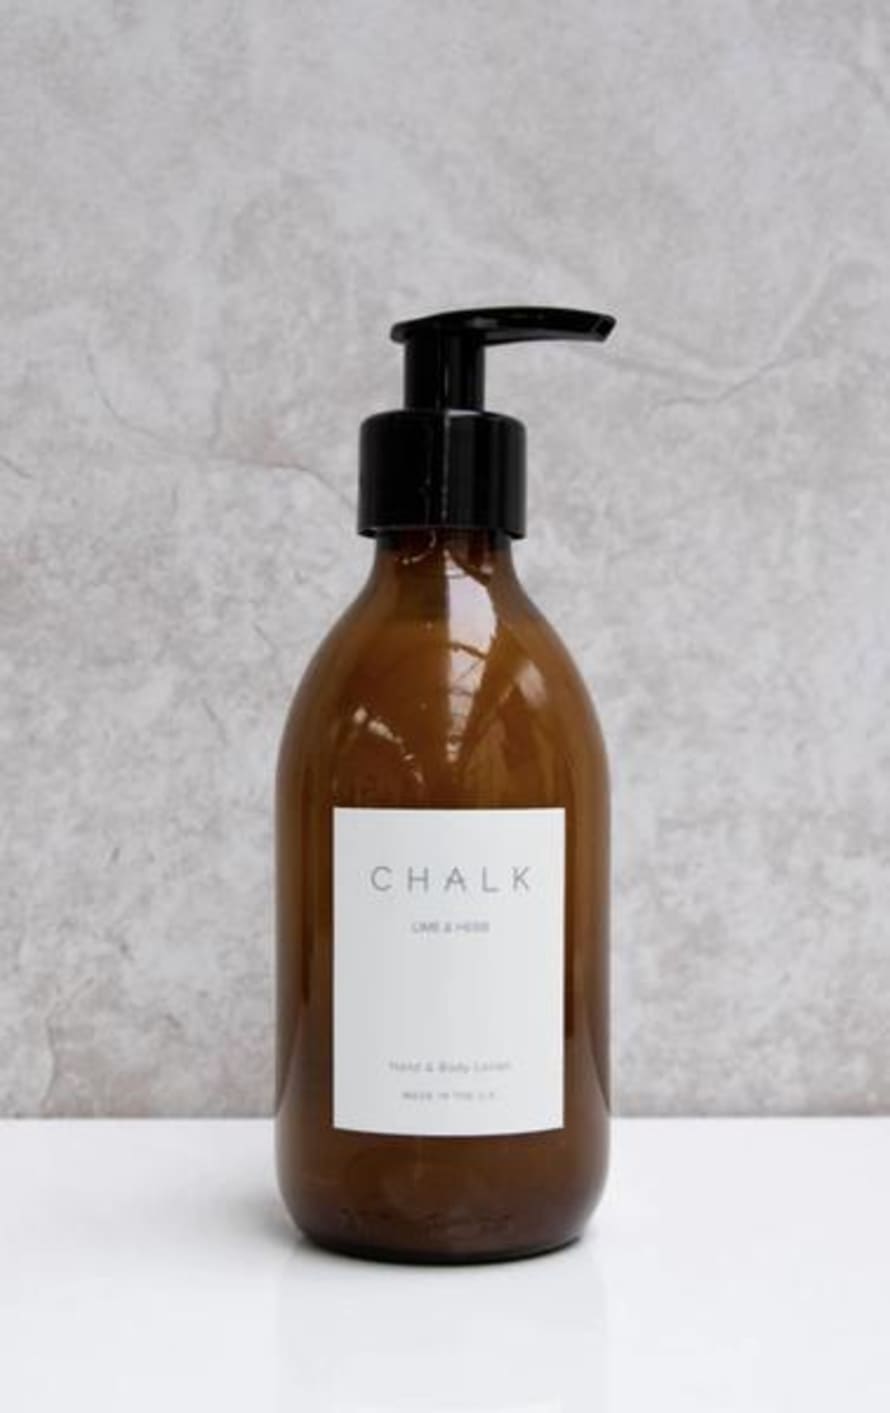 Chalk (original archived) Lime Herb Hand Body Lotion